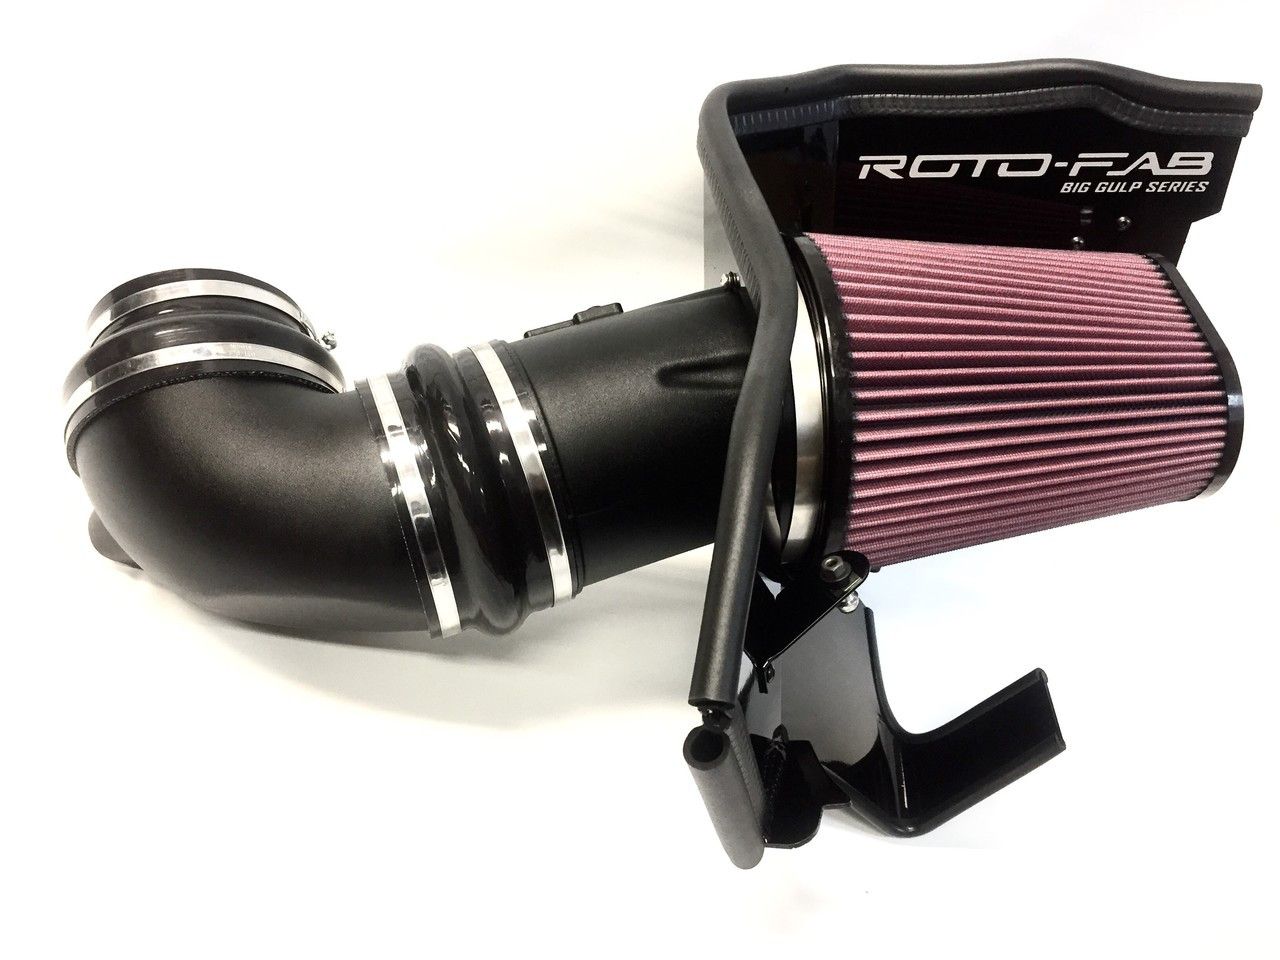 17-22+ Camaro ZL1 LT4 BIG GULP 5" Cold Air Intake W/ Oil Filter, Reducer Sleeve for Stock/95mm Throttle Bodies